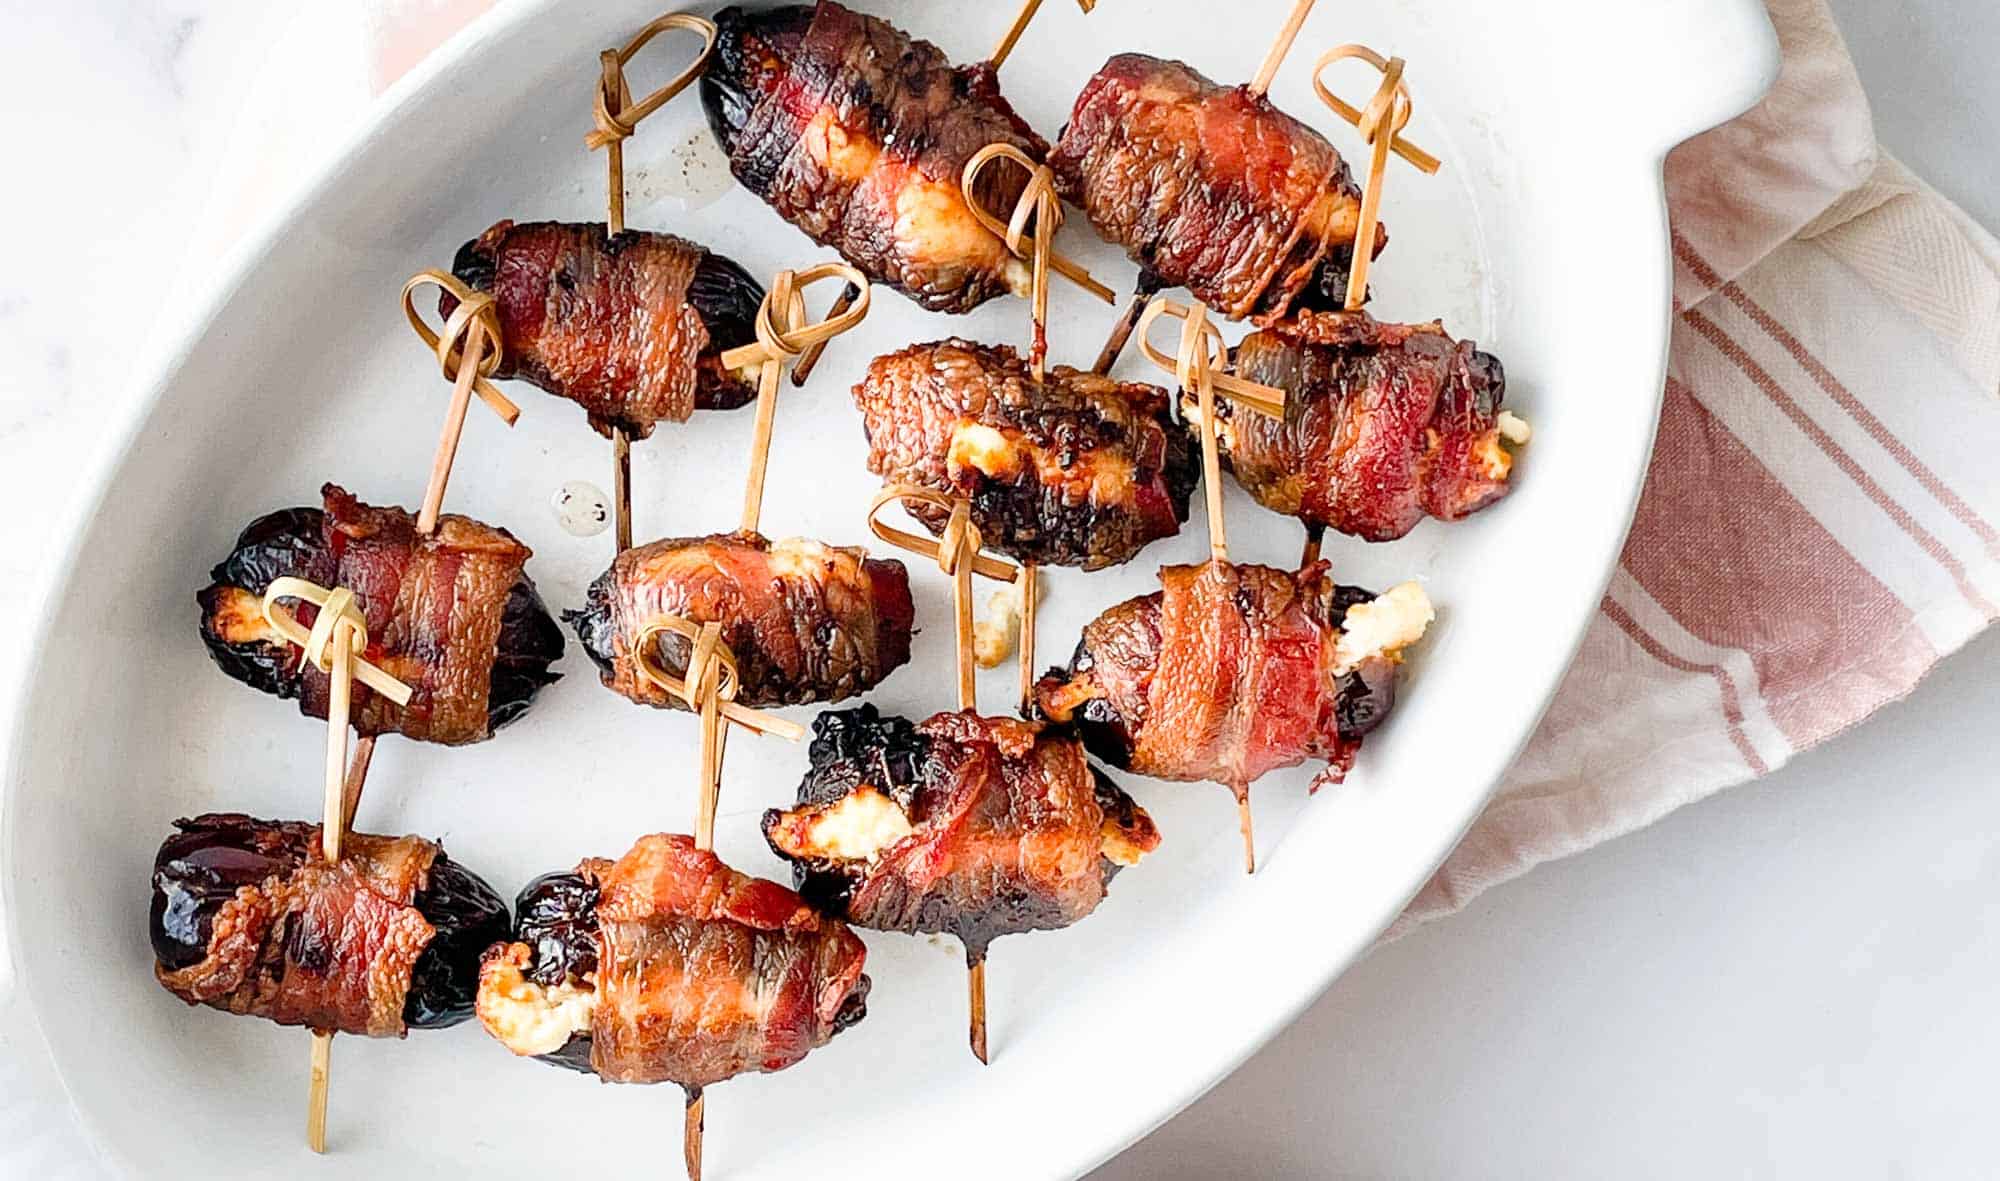 Bacon wrapped around dates and goat cheese in a dish.